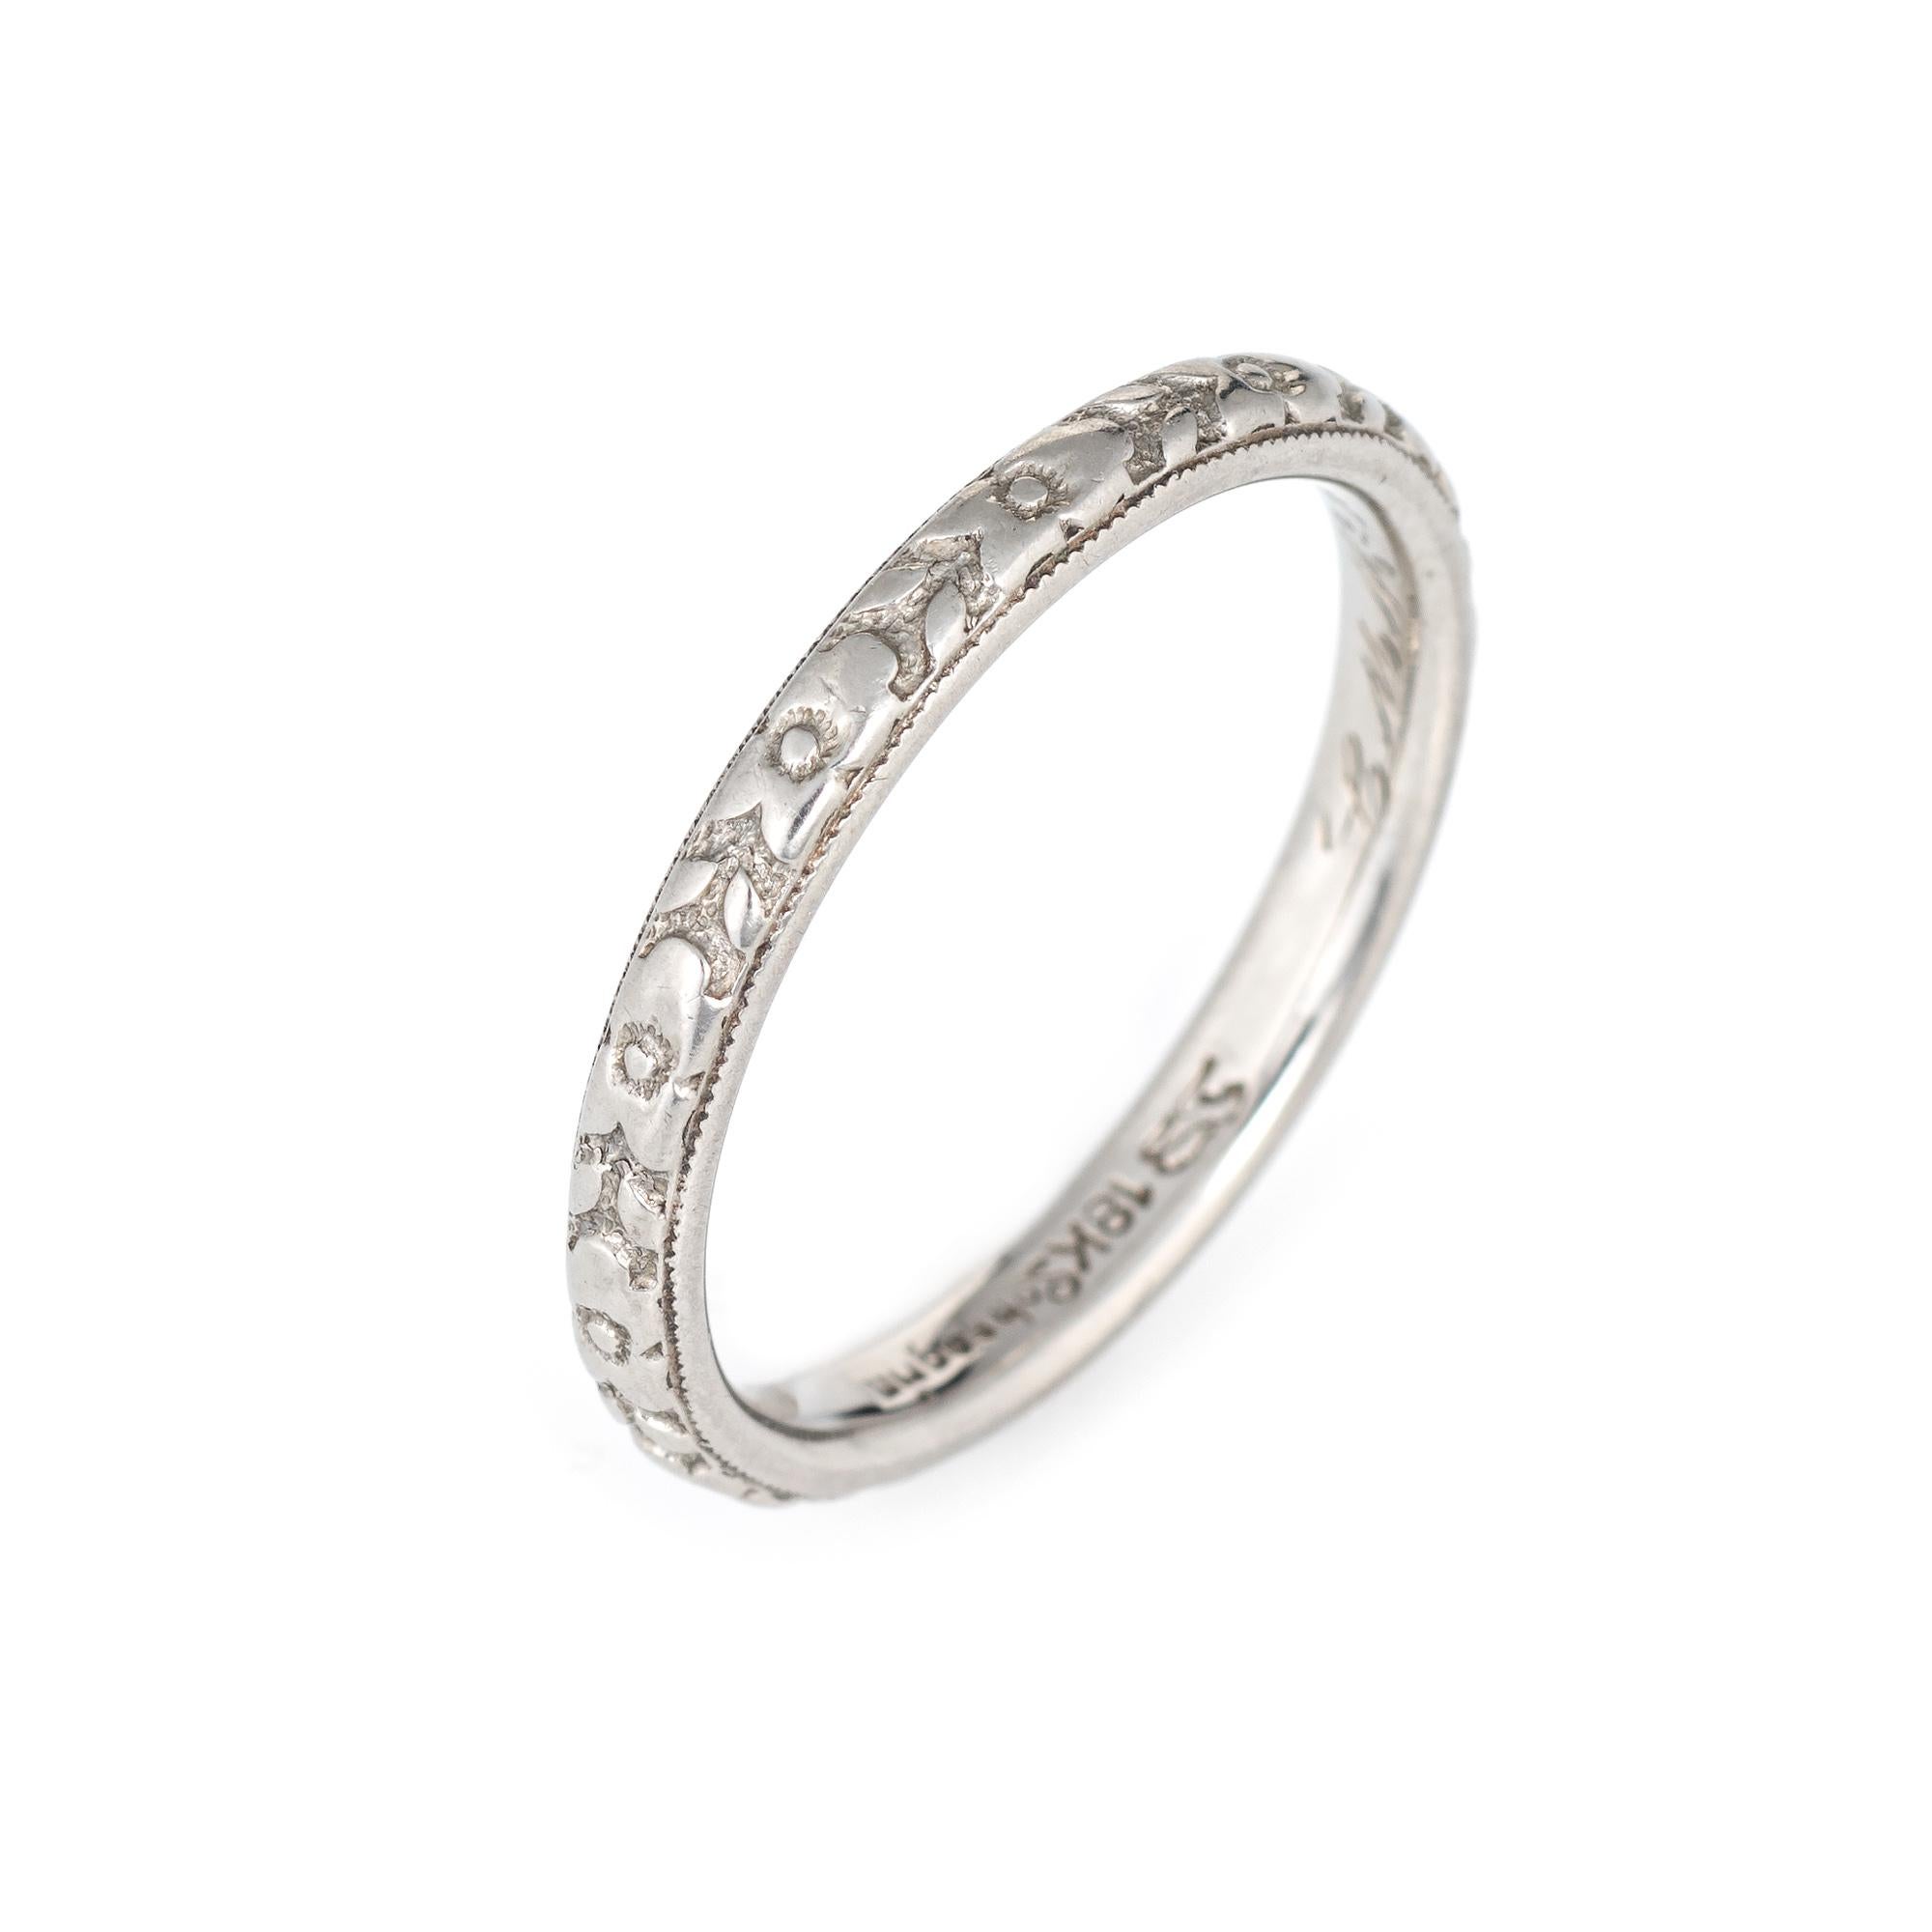 Elegant vintage Art Deco era band (circa 1920s to 1930s) crafted in 18k white gold. 

The ring epitomizes vintage charm and would make a lovely wedding band. Also great worn alone or stacked with your jewelry from any era. The inner band is engraved